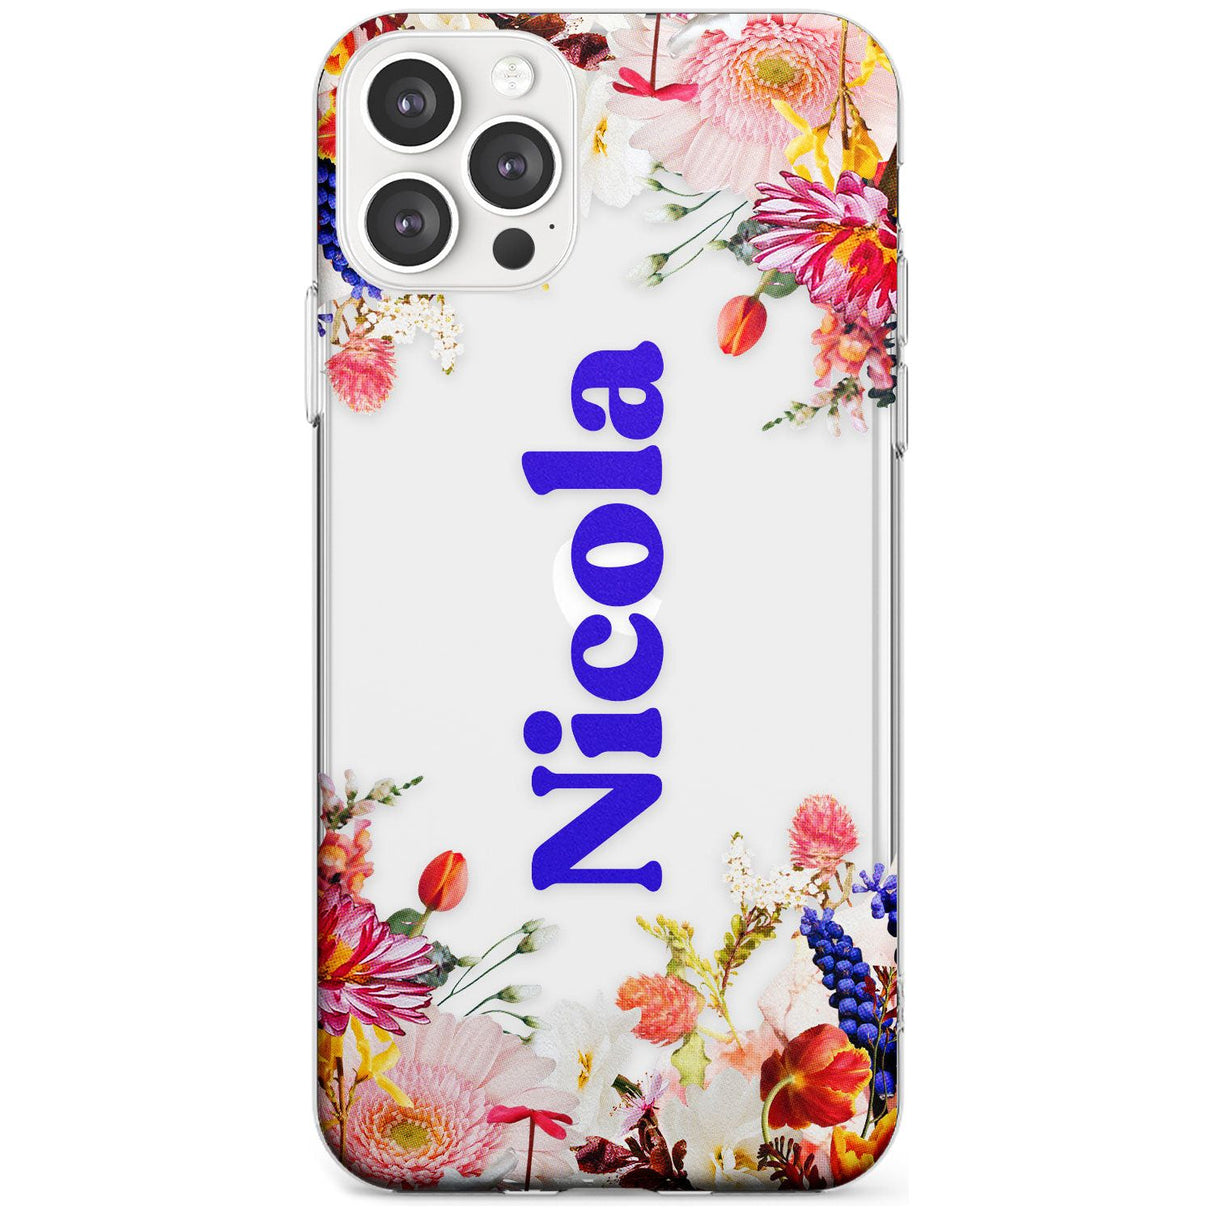 Custom Text with Floral Borders Black Impact Phone Case for iPhone 11 Pro Max